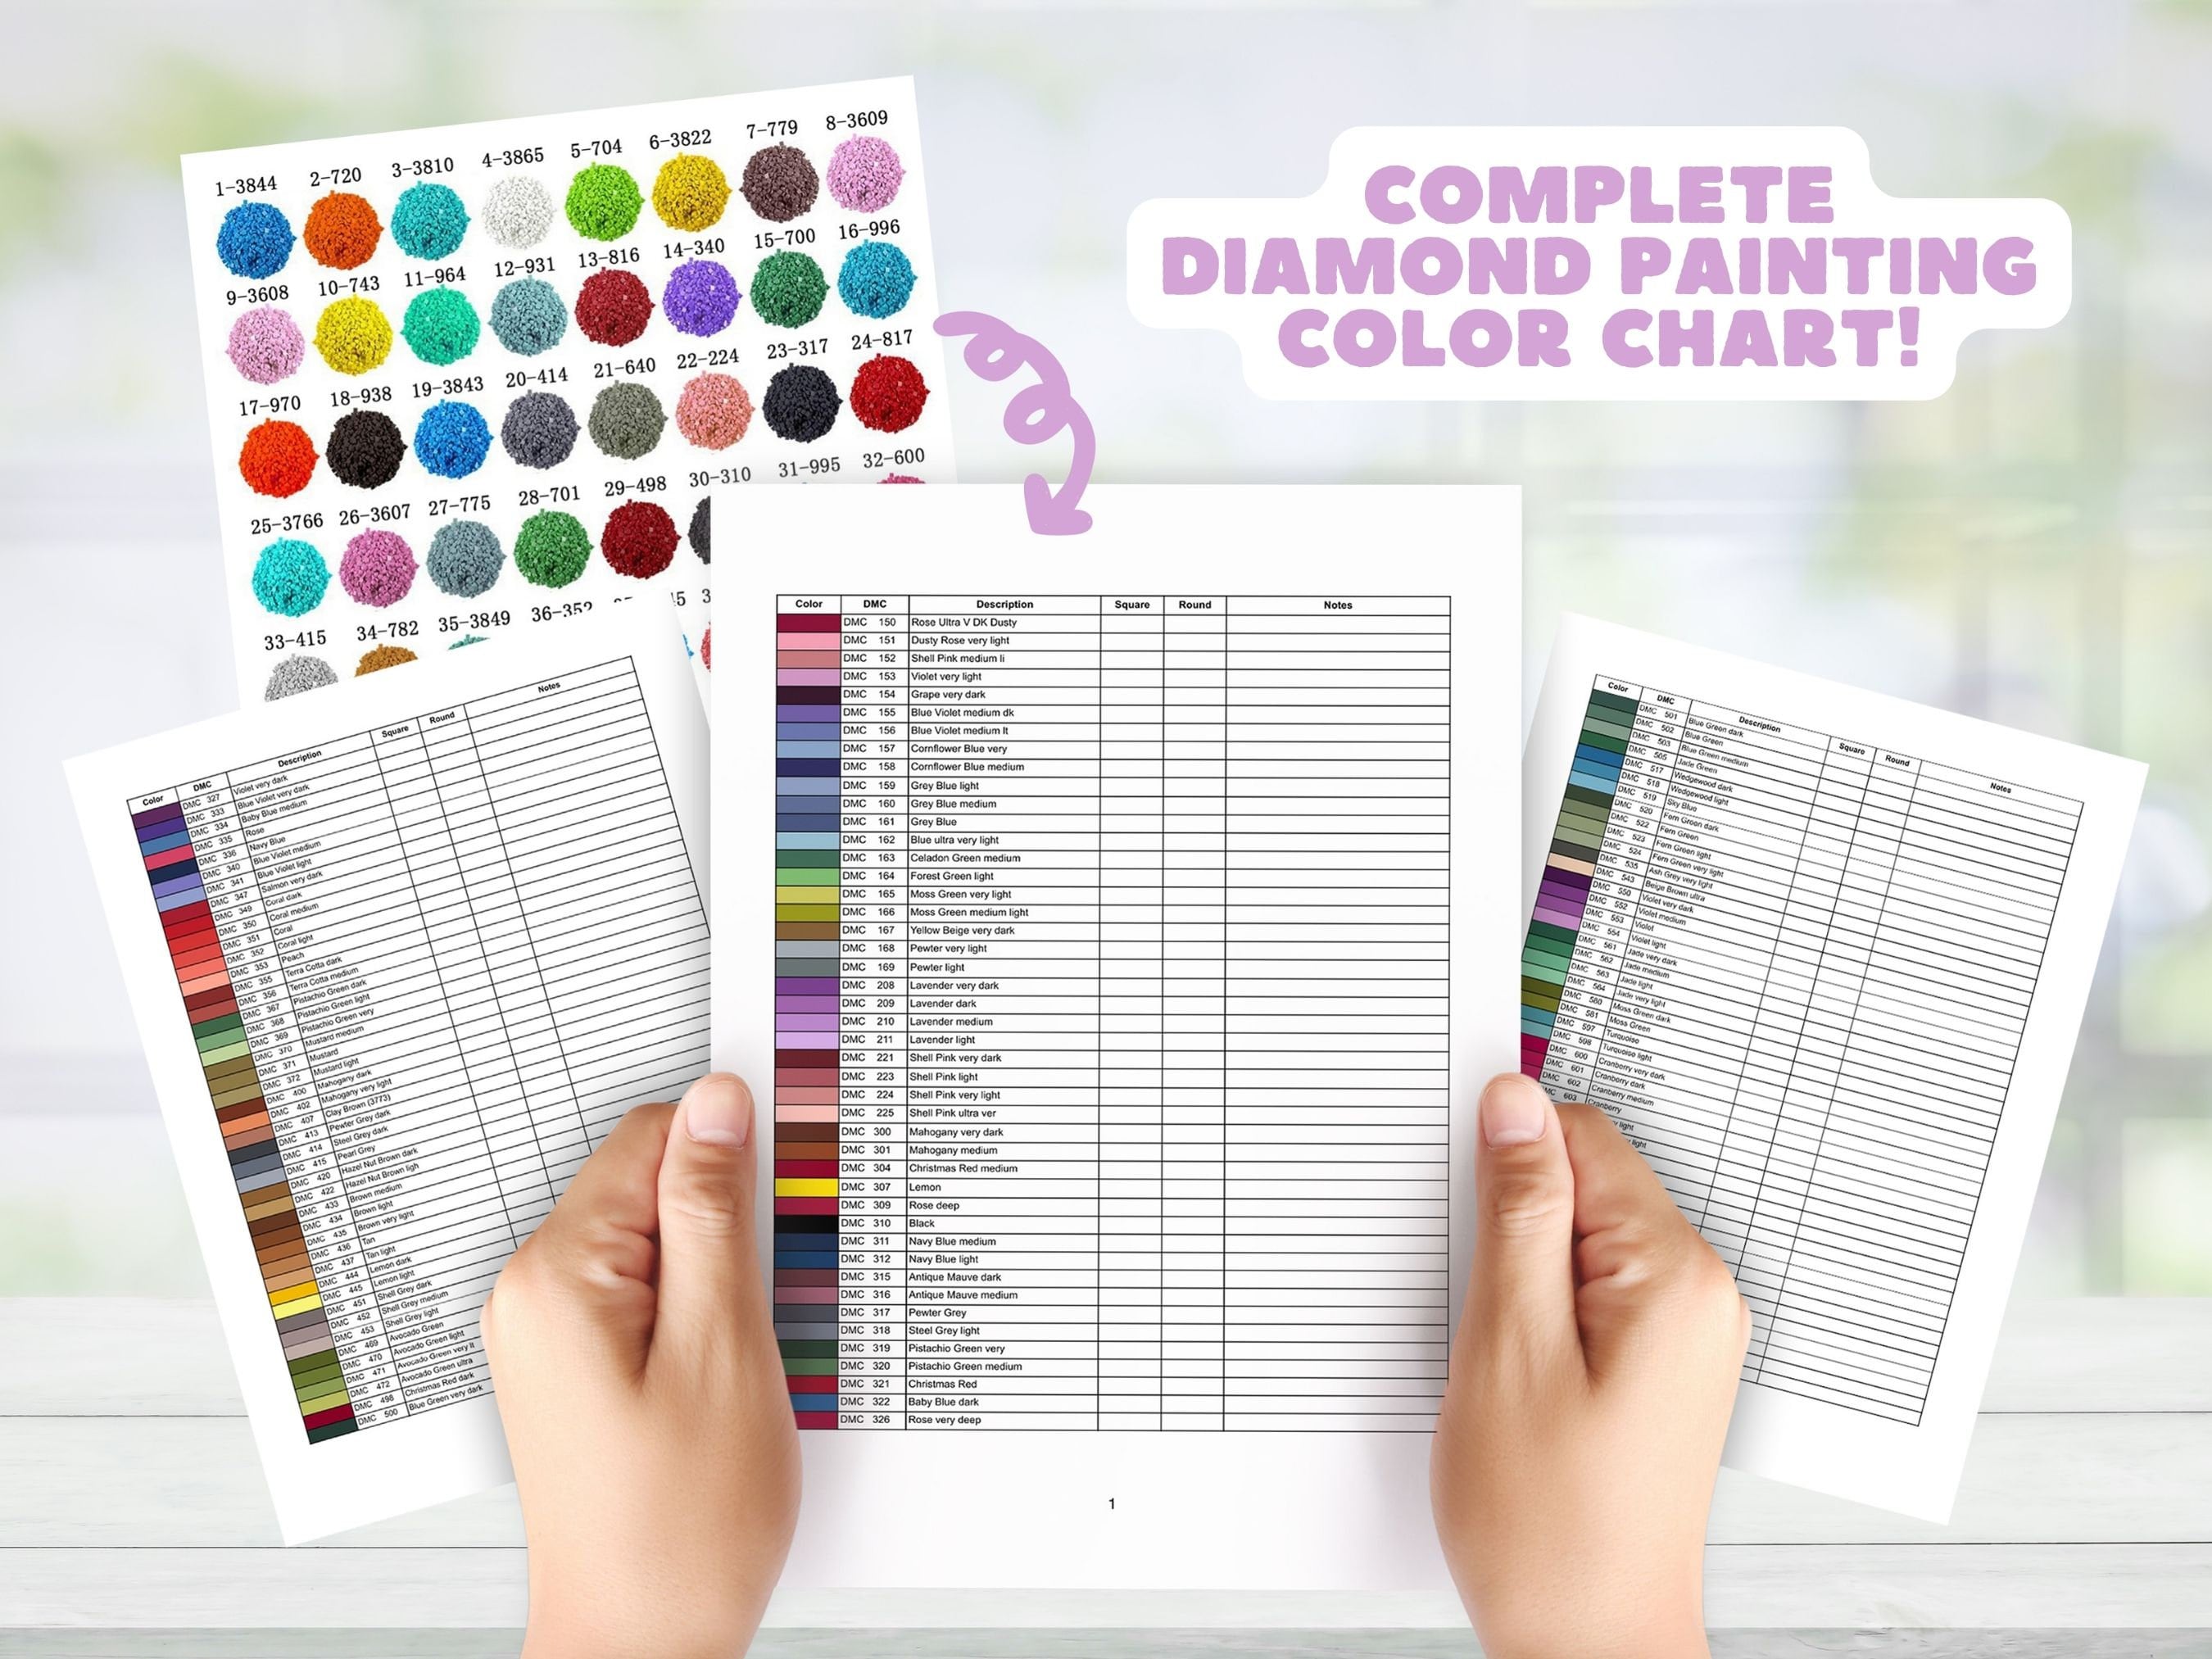 Complete List of DMC Diamond Painting Beads Color Chart 447 Colors  Printable Tracker Inventory Sheet PDF Download 